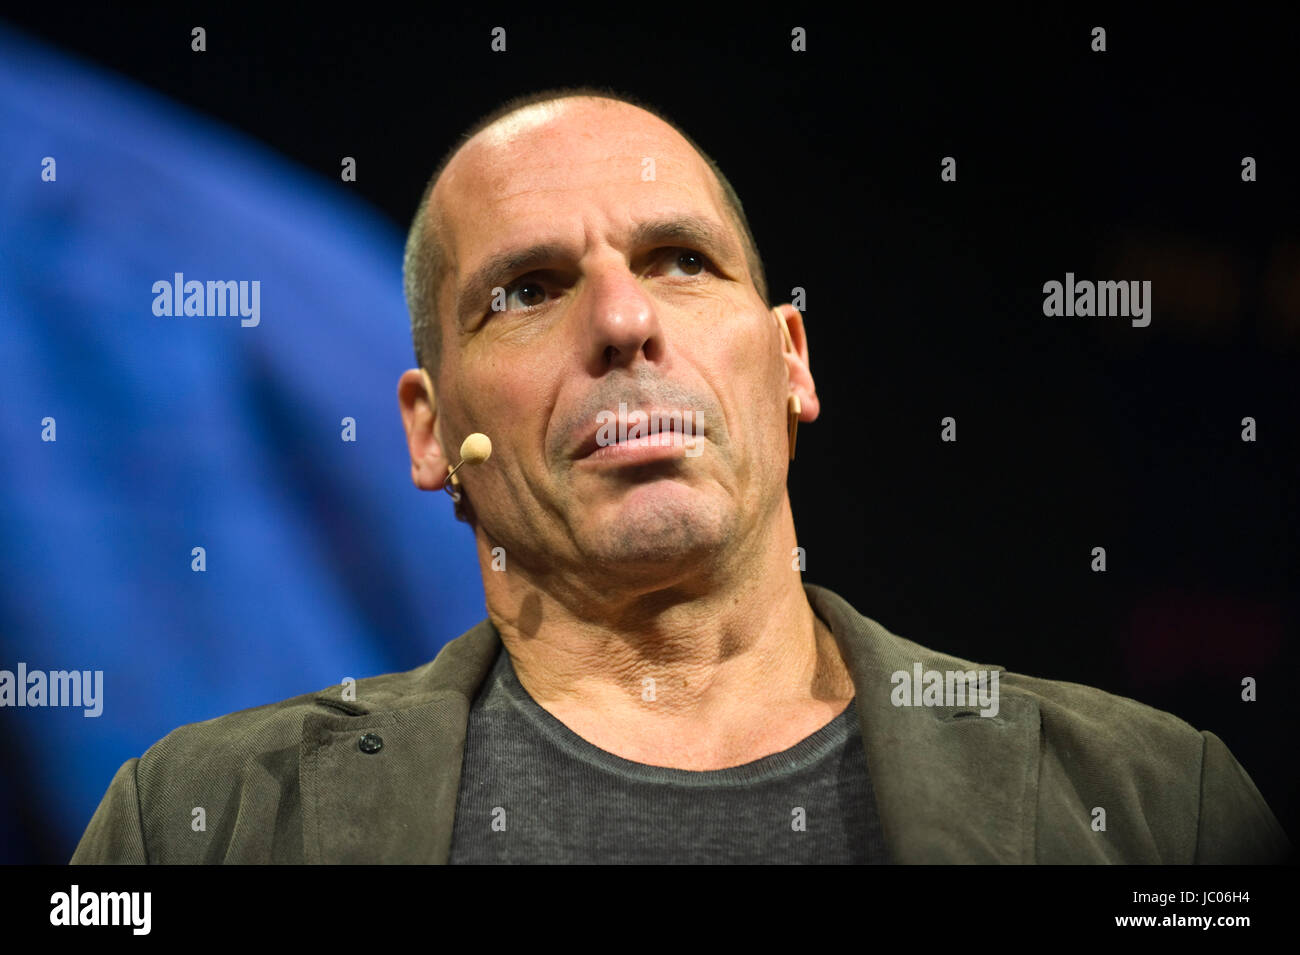 Yanis Varoufakis Greek economist academic & politician speaking on stage from lectern at Hay Festival of Literature and the Arts 2017 Hay-on-Wye Powys Wales UK Stock Photo